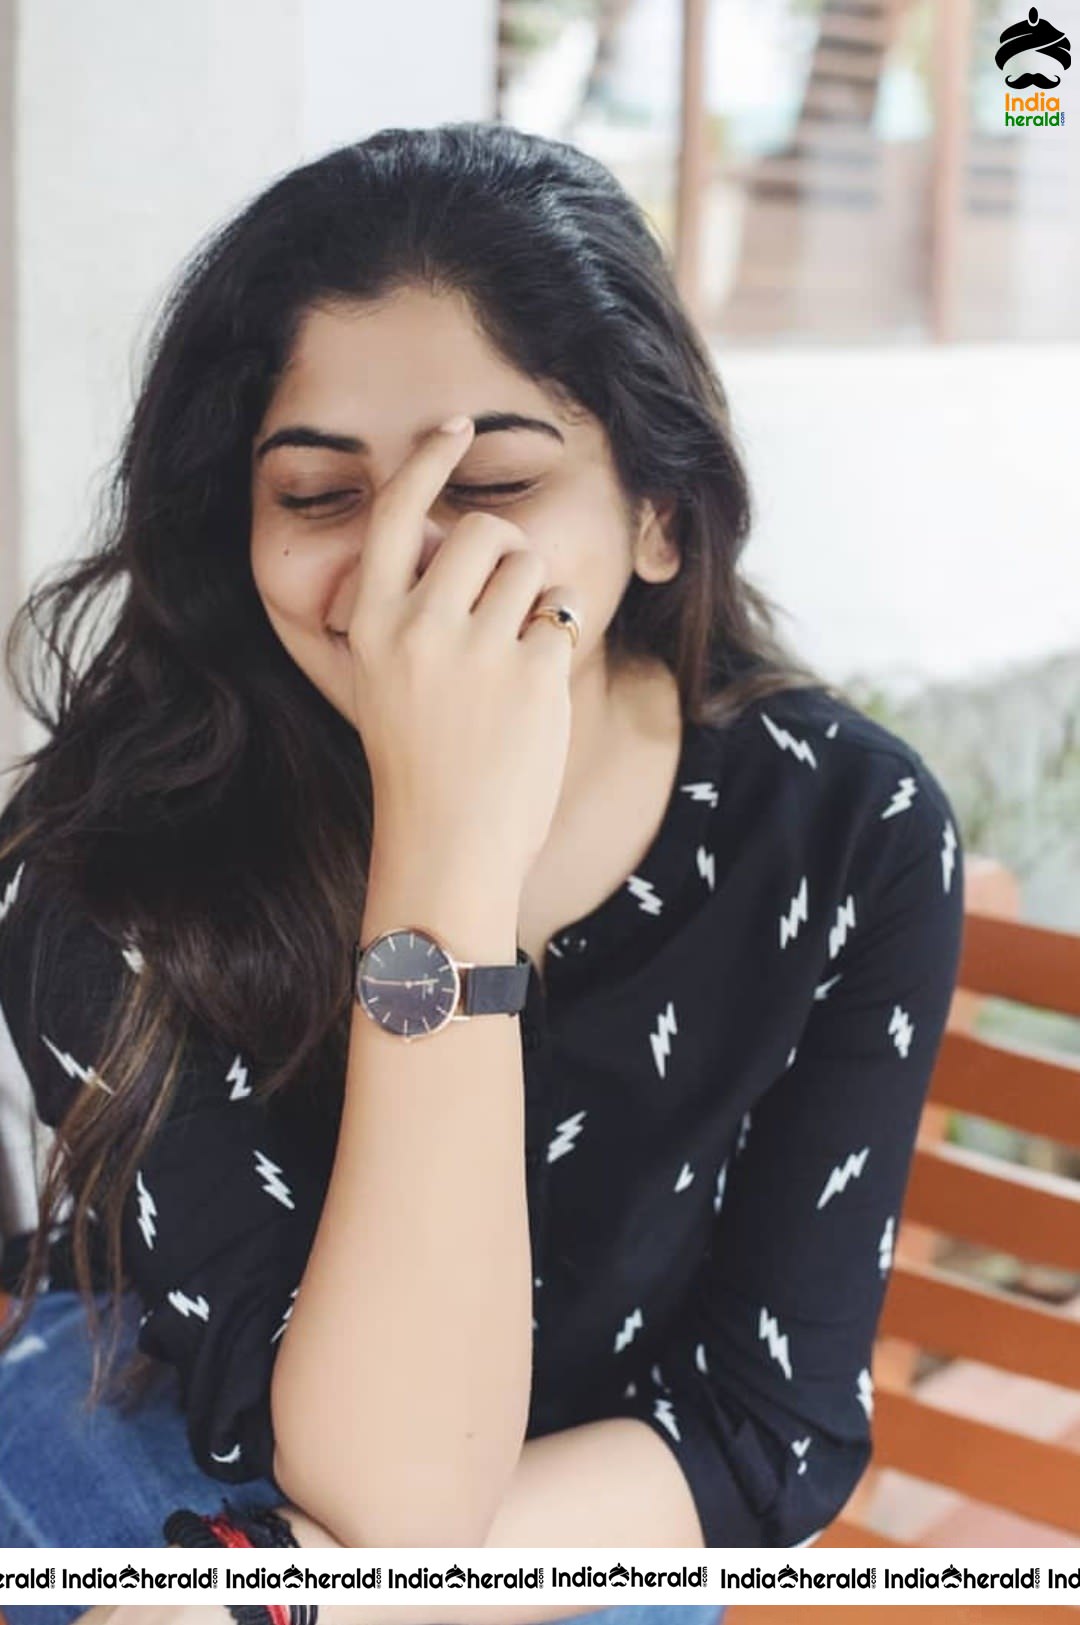 Manjima Mohan Looking Pretty Even Without Any Makeup